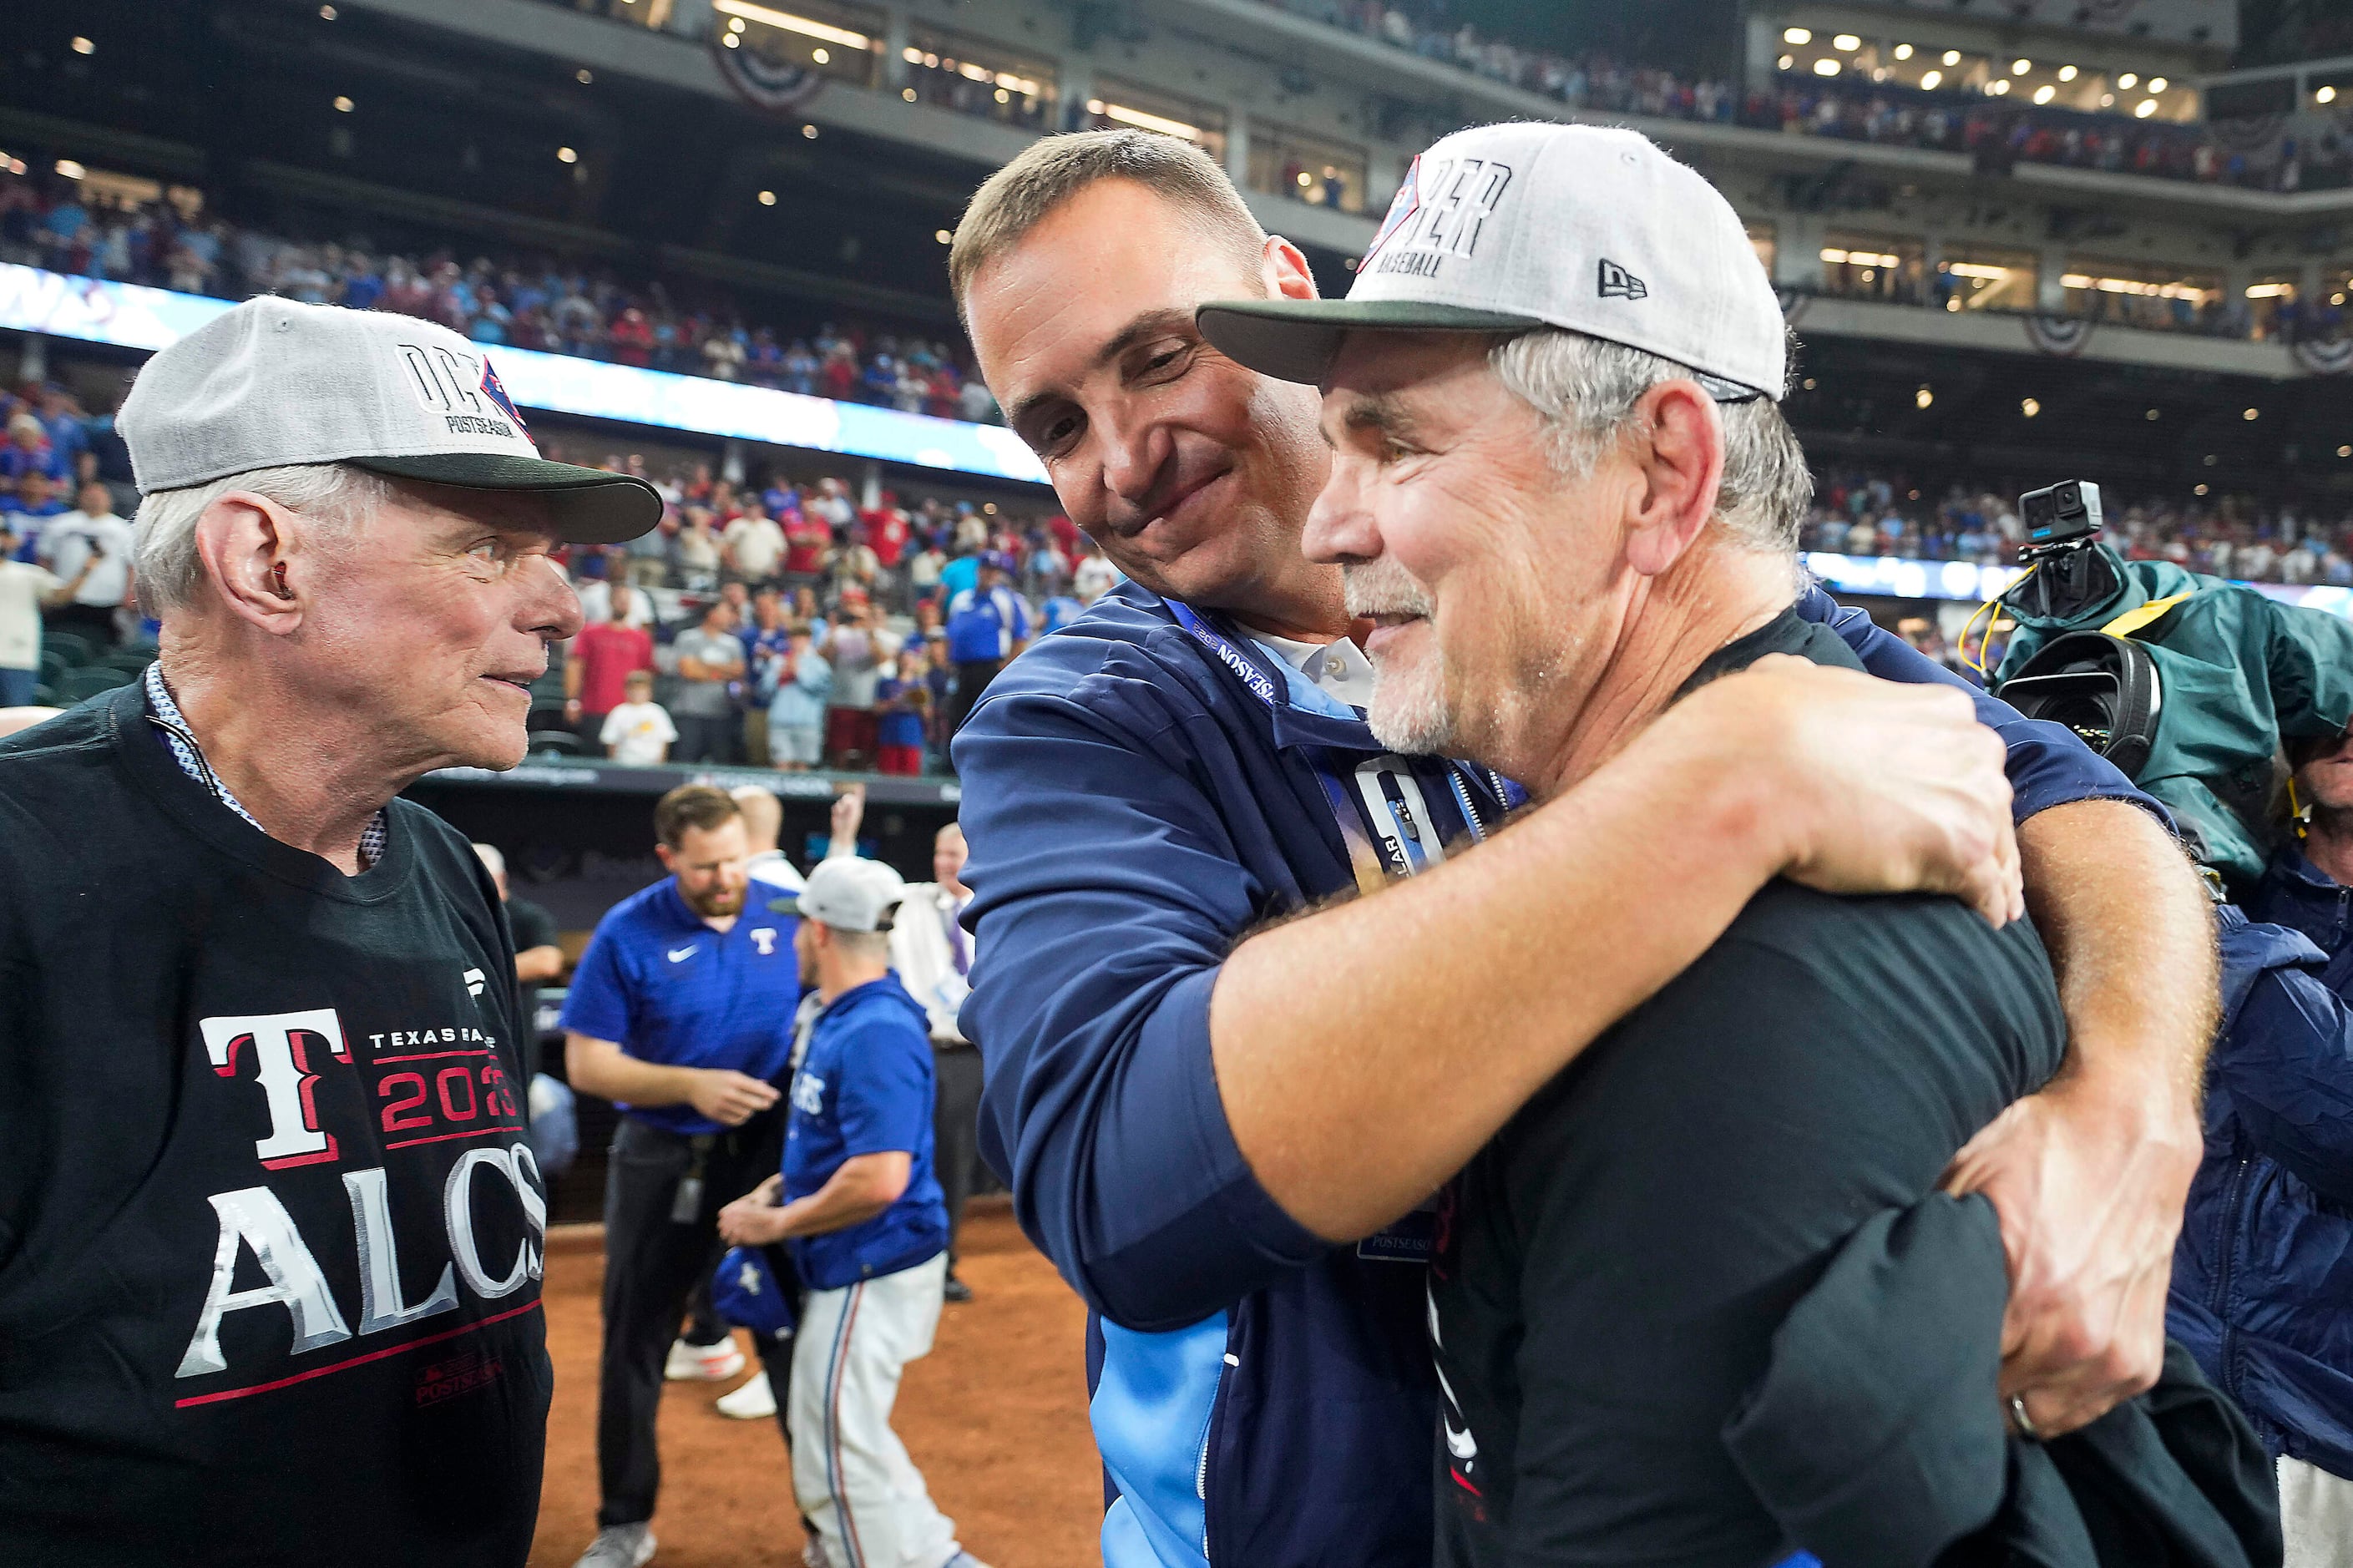 Texas Rangers manager Bruce Bochy on ALCS Game 1 win over Astros